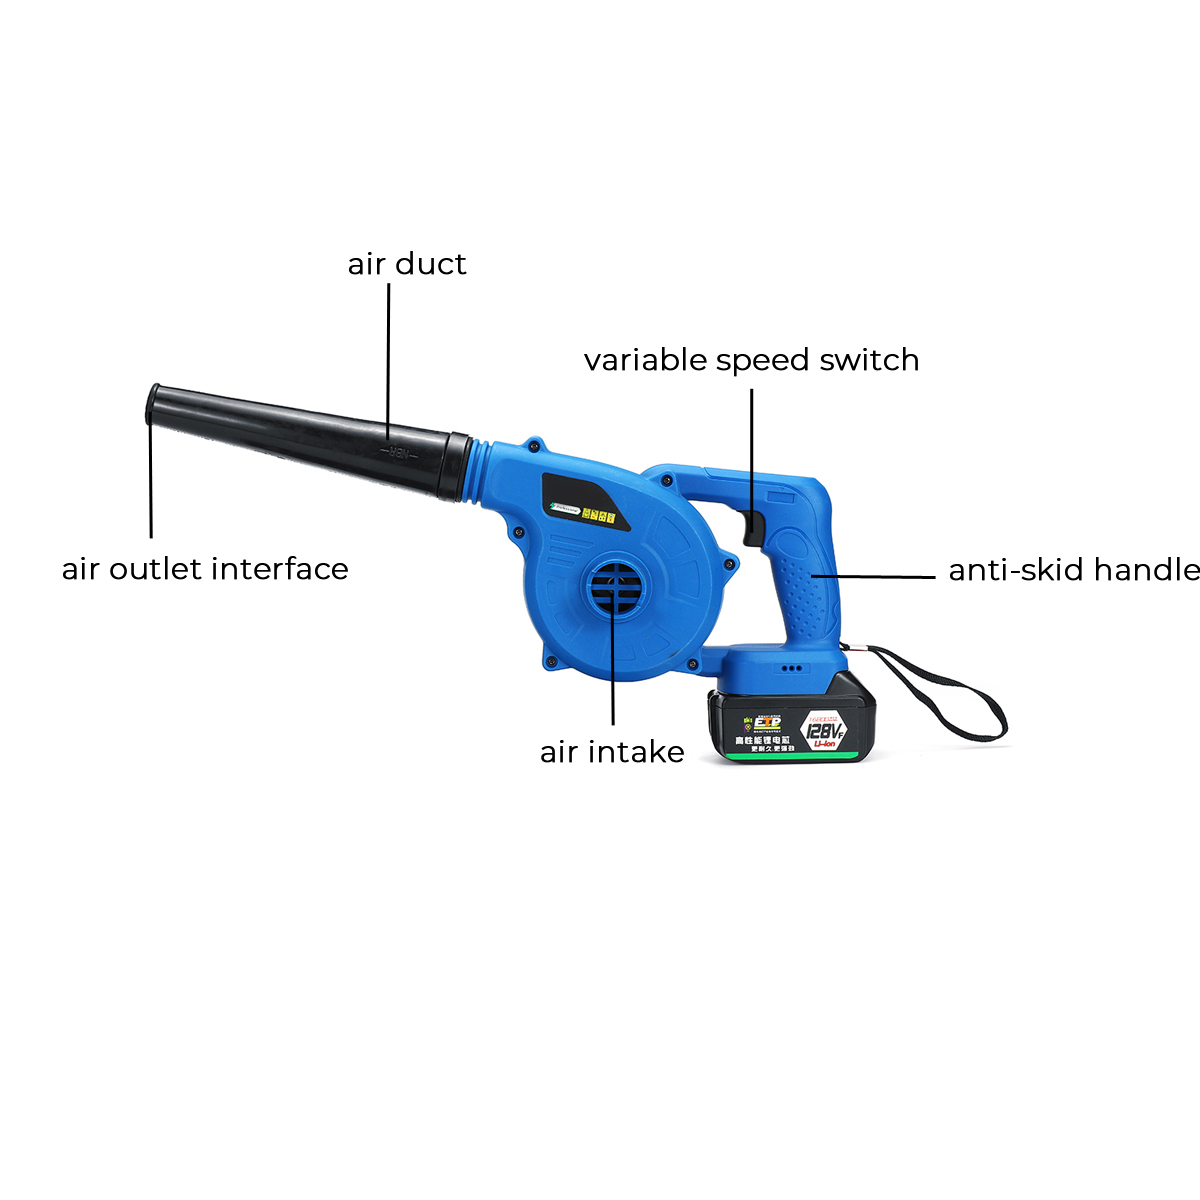 220v-1200W-Electric-Wireless-Handheld-Blower-Computer-Dust-Collector-Rechargeable-Lithium-One-Batter-1562214-7